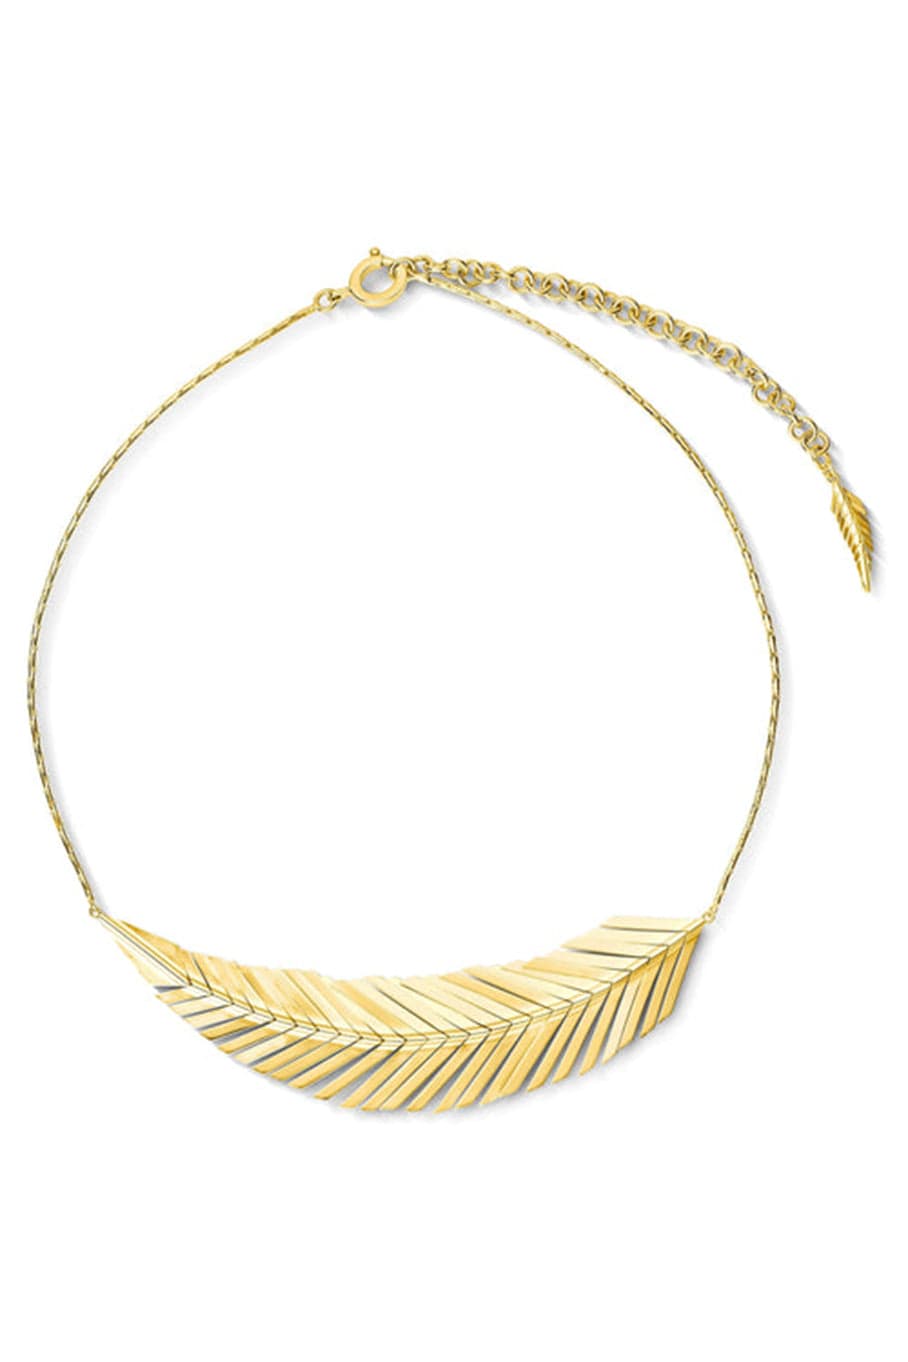 CADAR-Feather Necklace-YELLOW GOLD